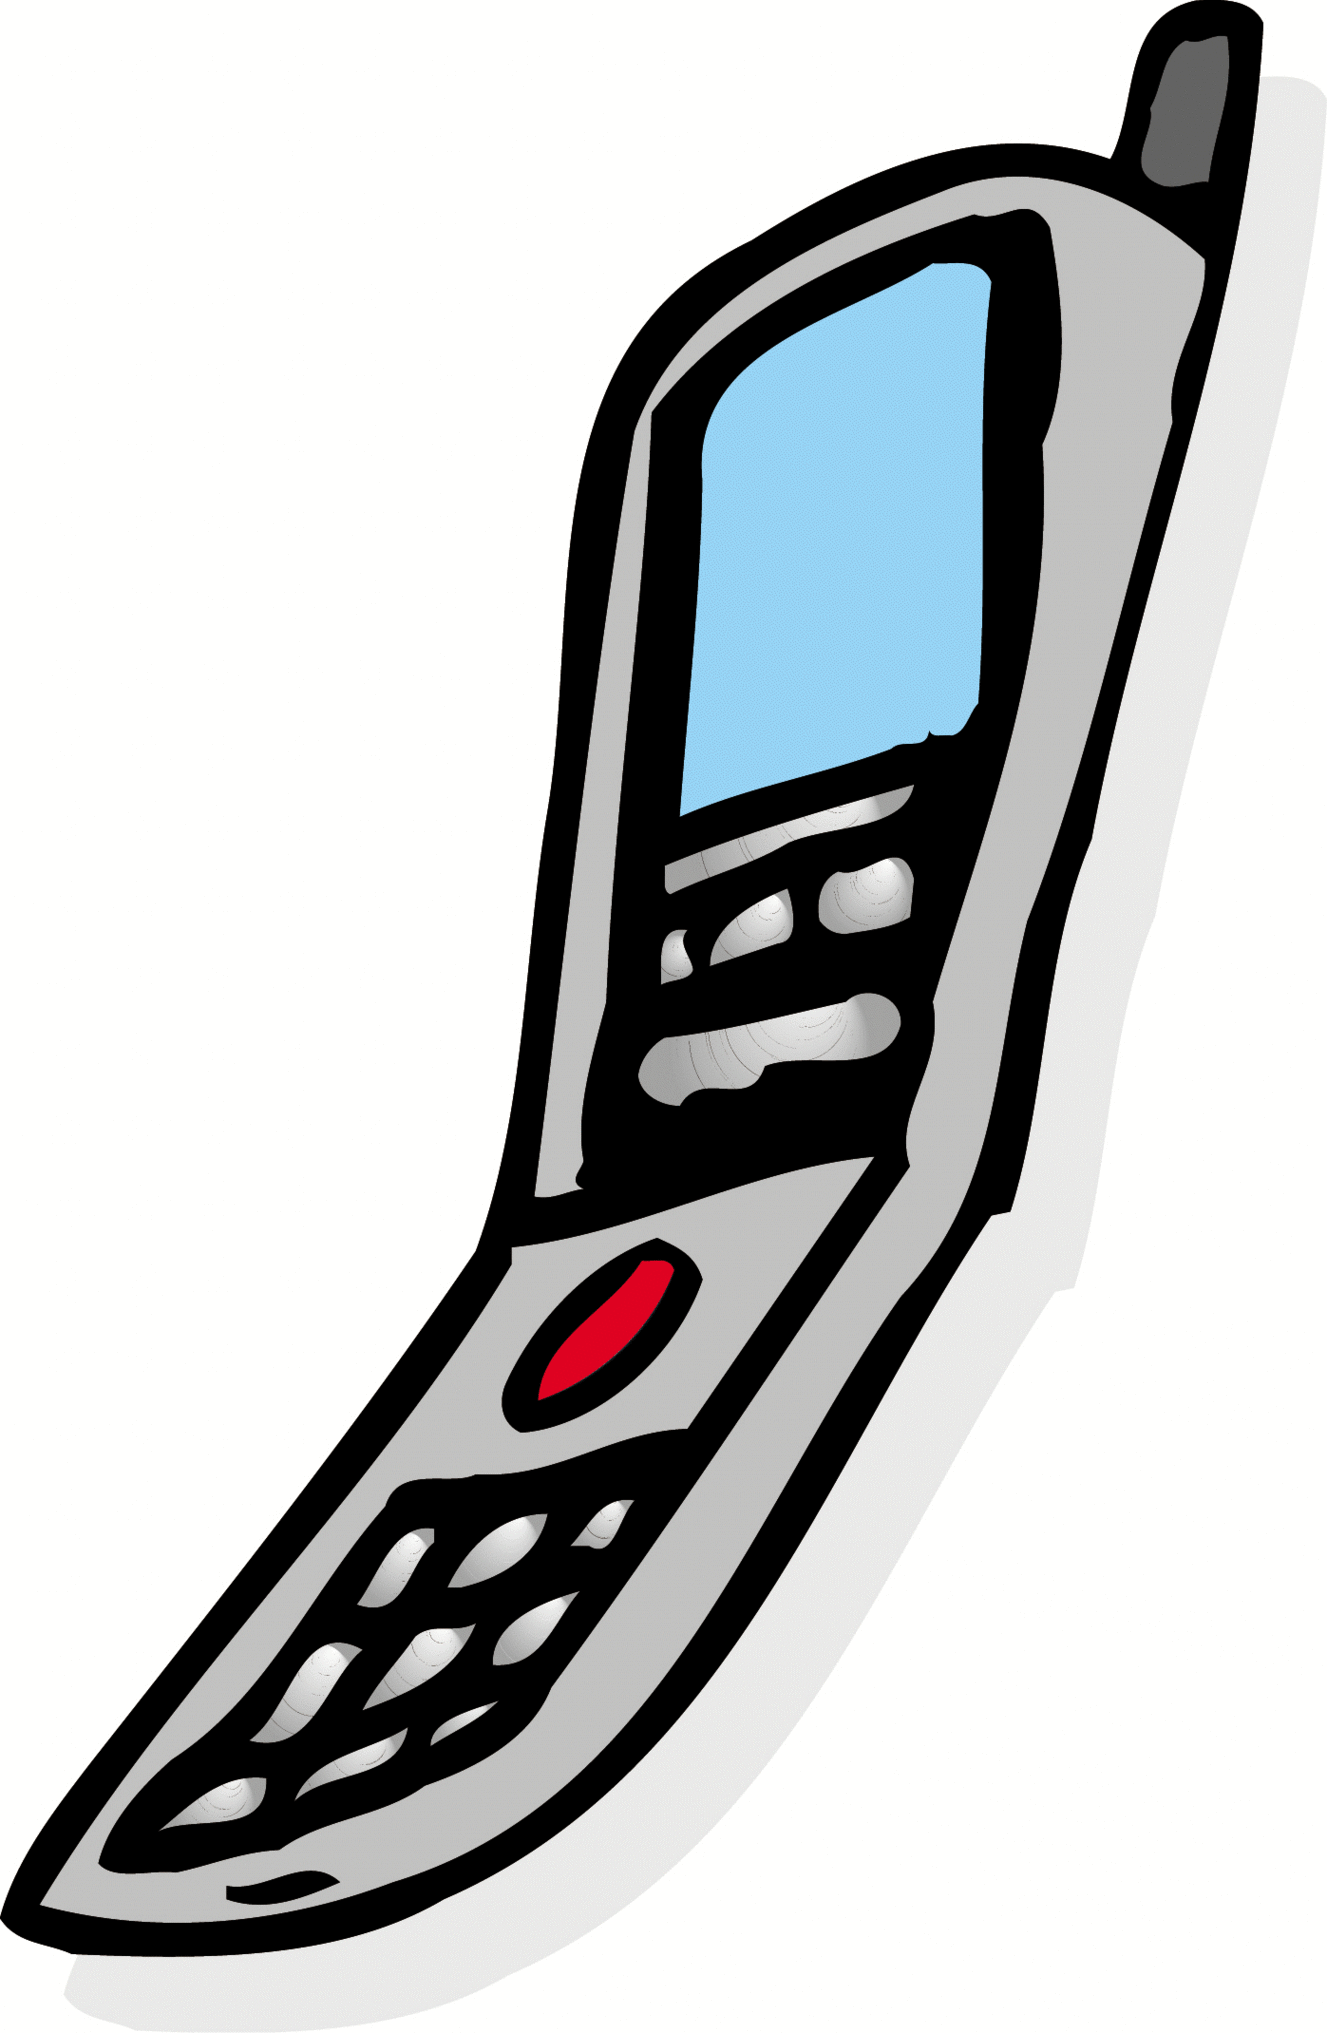 Phone Gif Clipart - Free to use Clip Art Resource